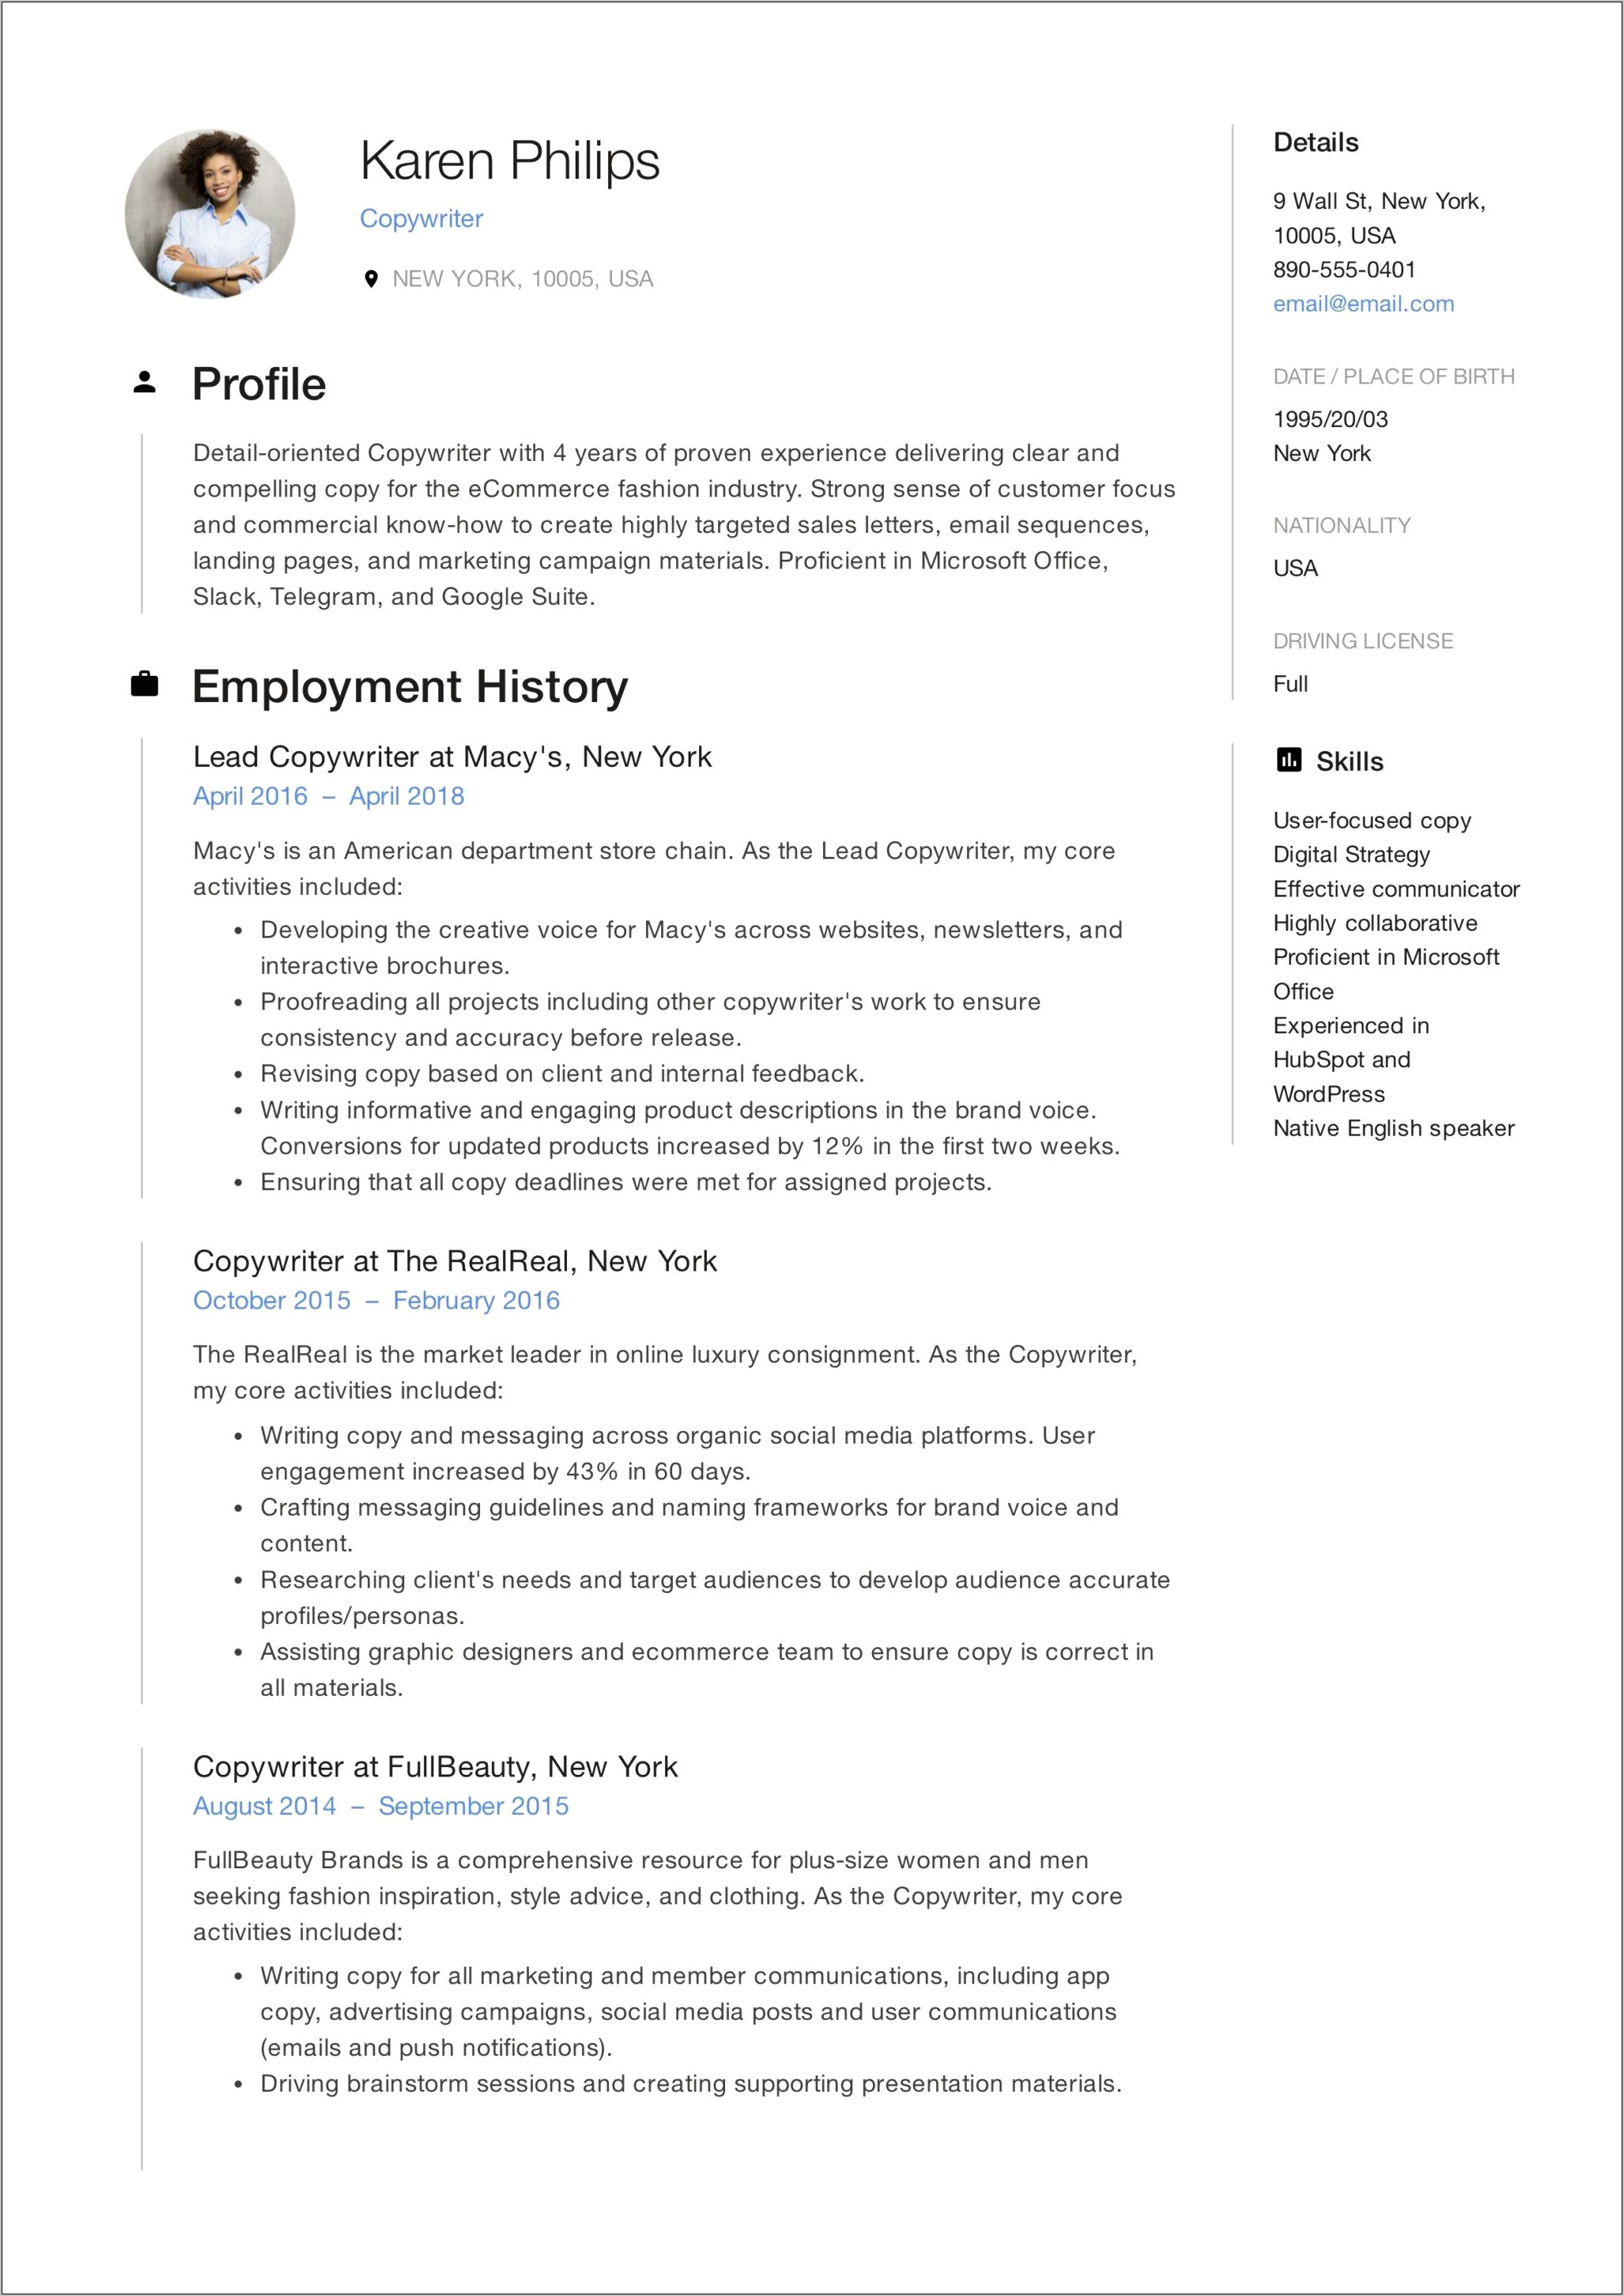 Resume Summary Statement For Copywriters Examples